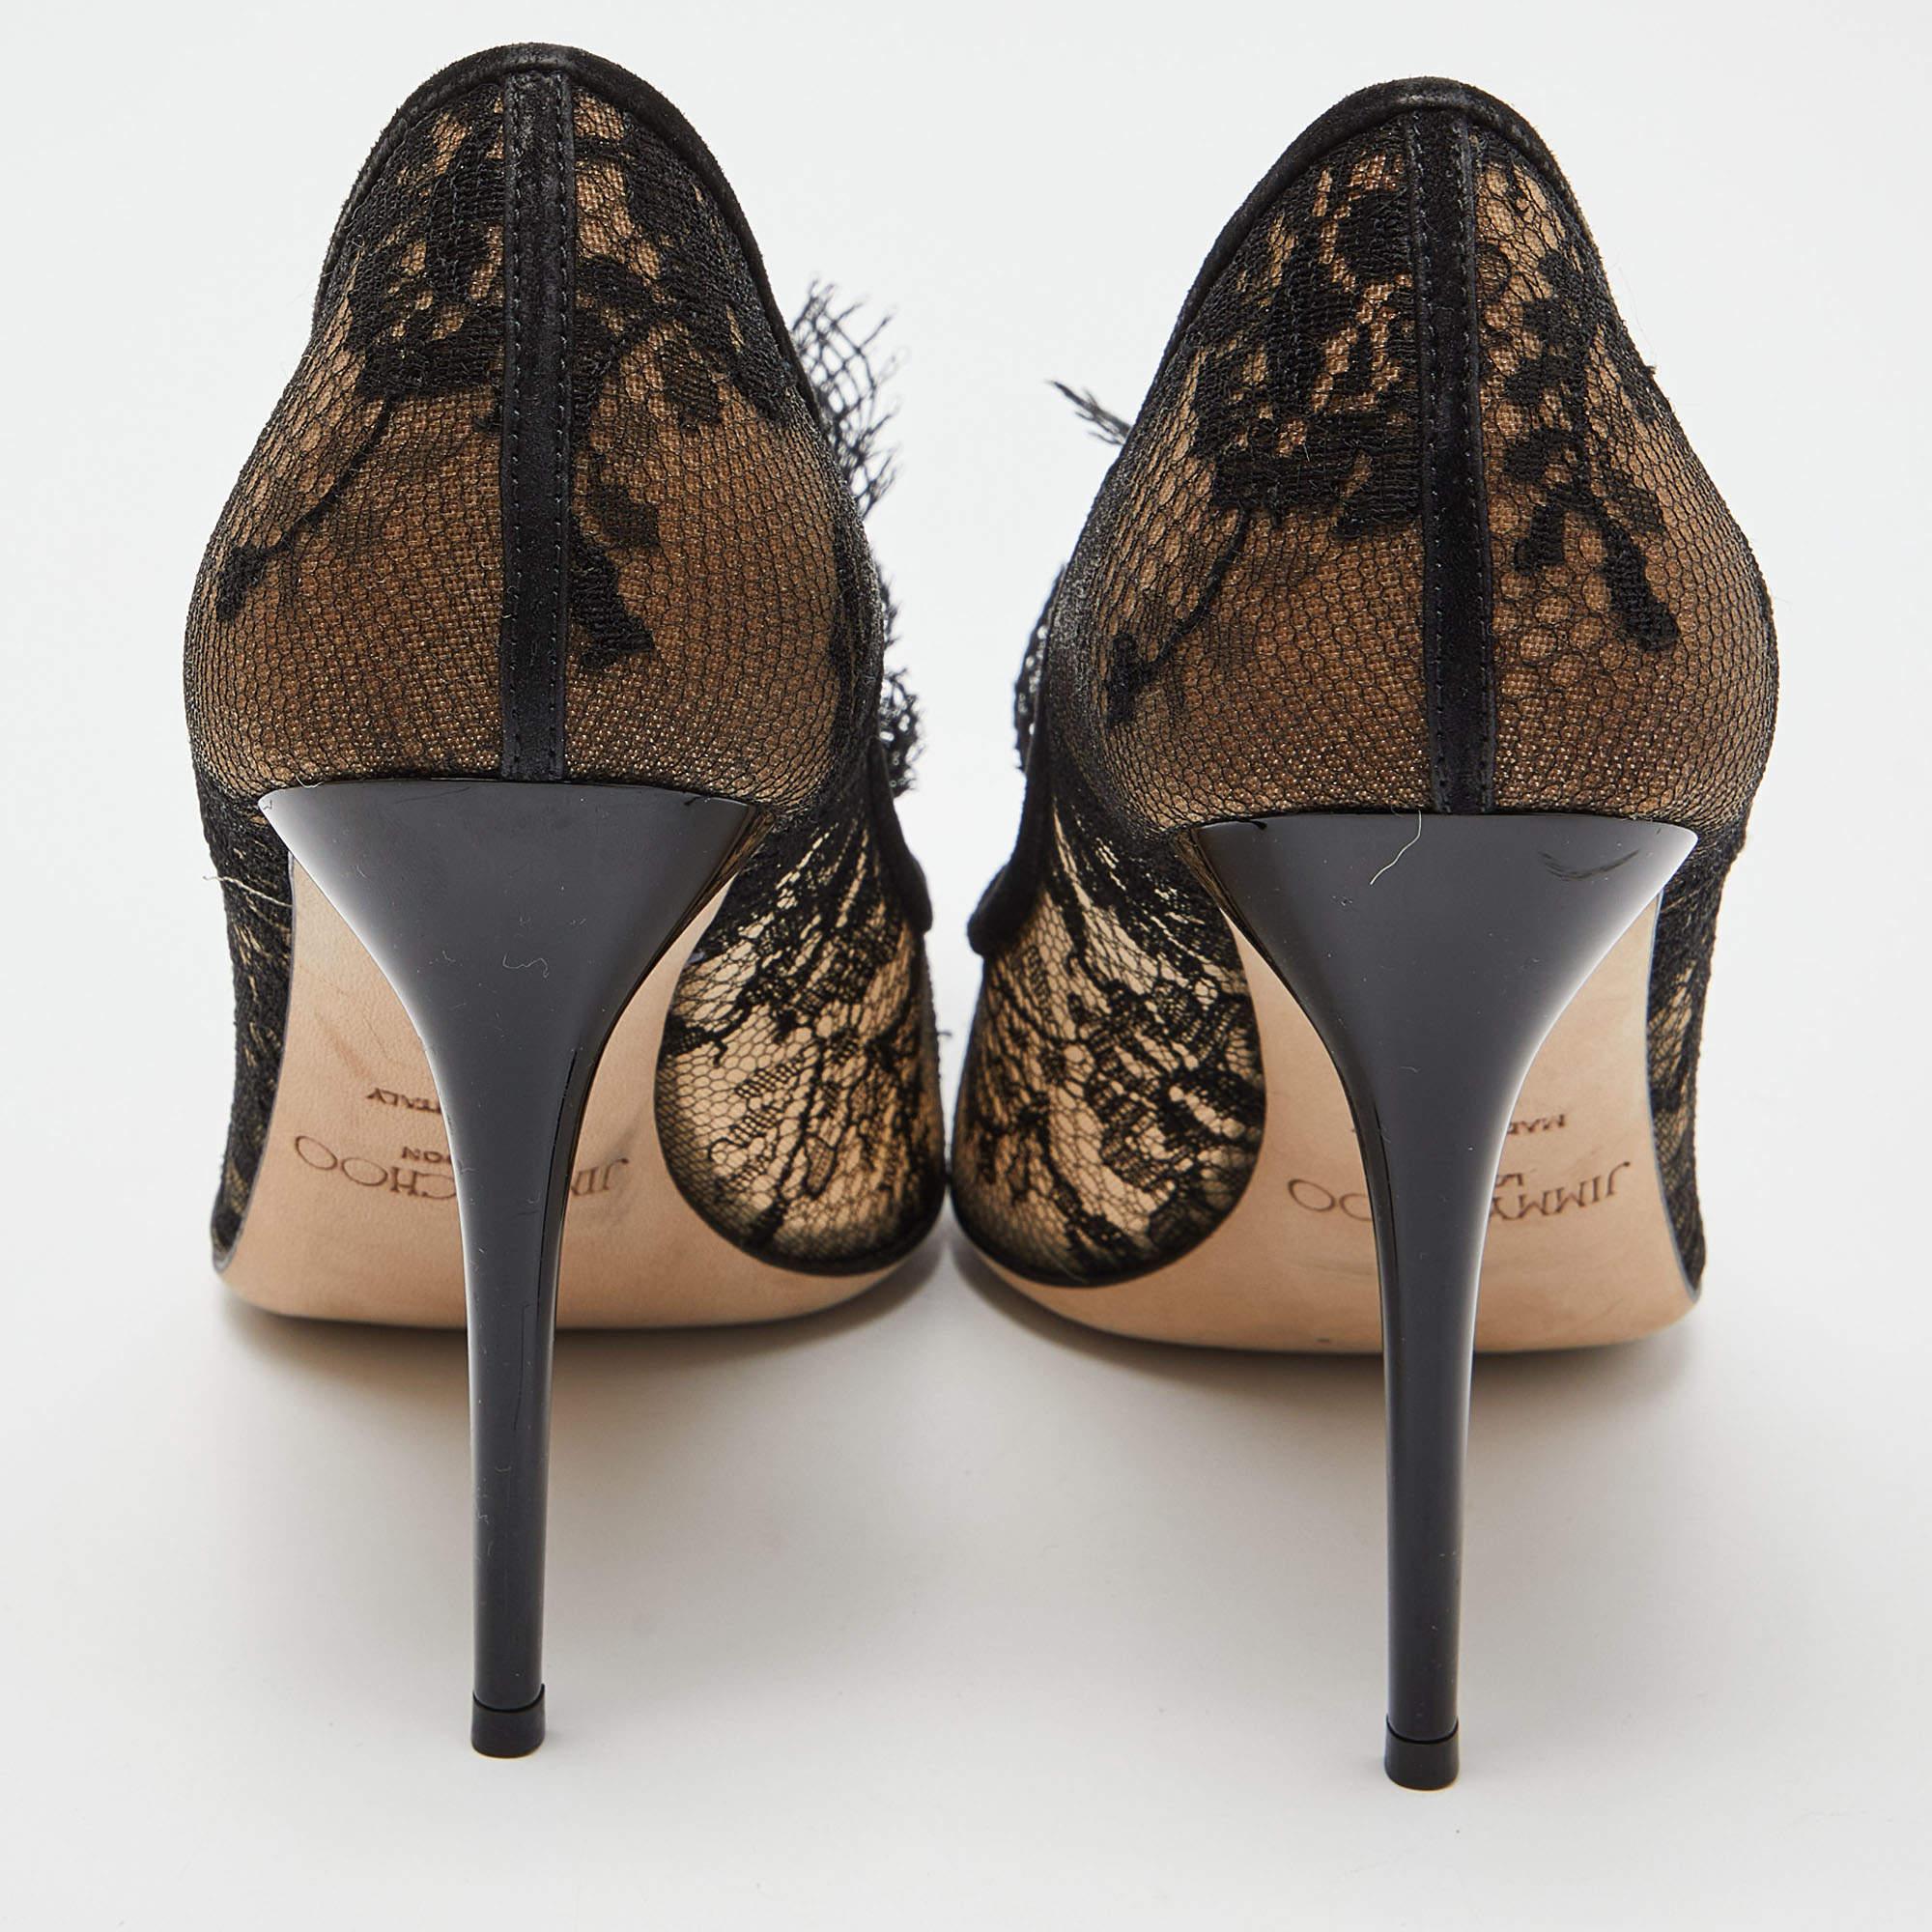 Jimmy Choo Black Lace Pointed Toe Pumps Size 39 4